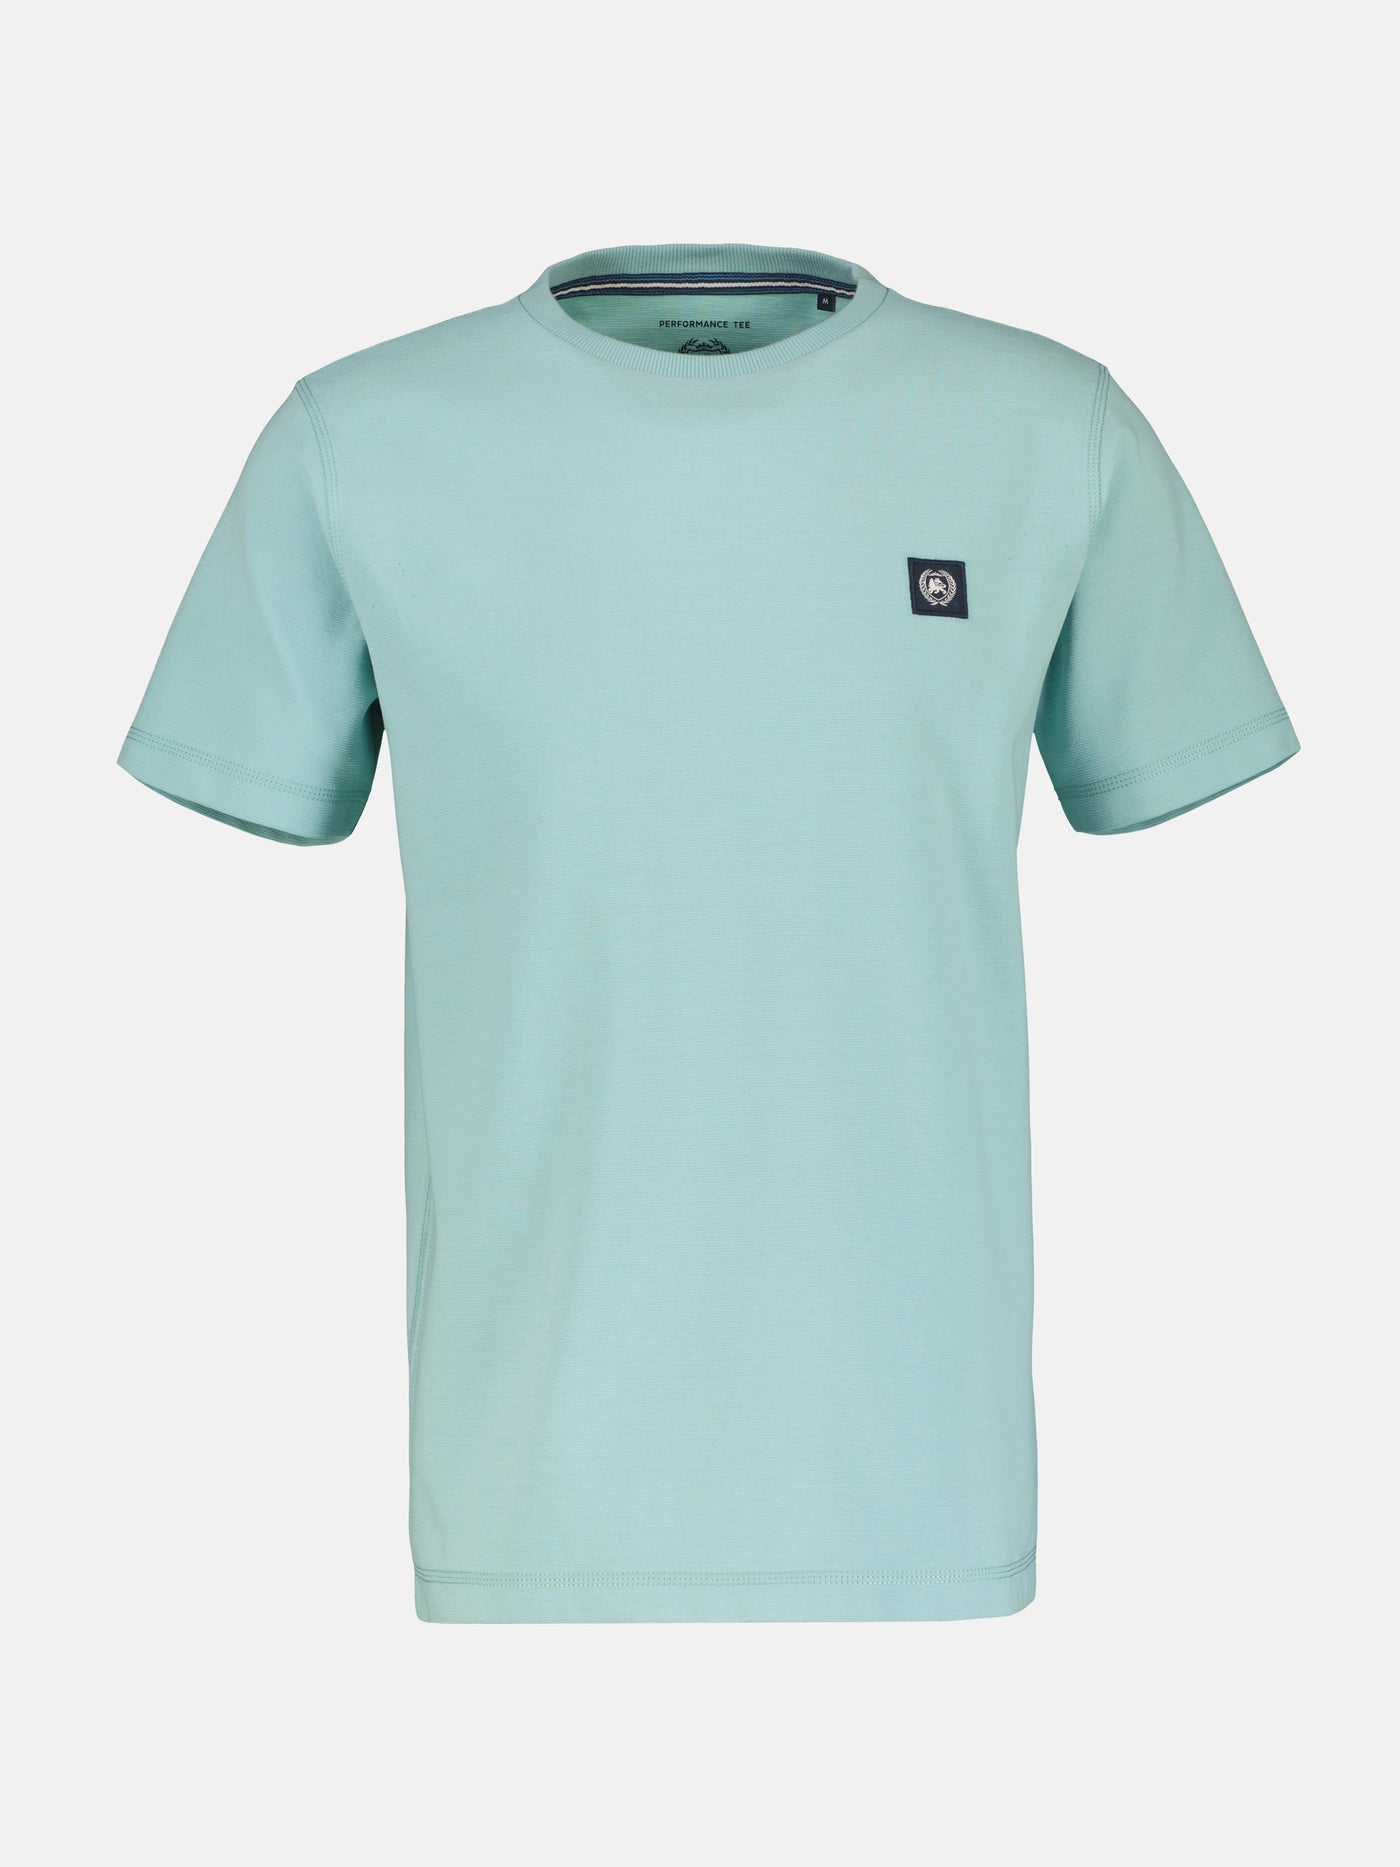 T-shirt in Cool &amp; Dry quality, plain coloured